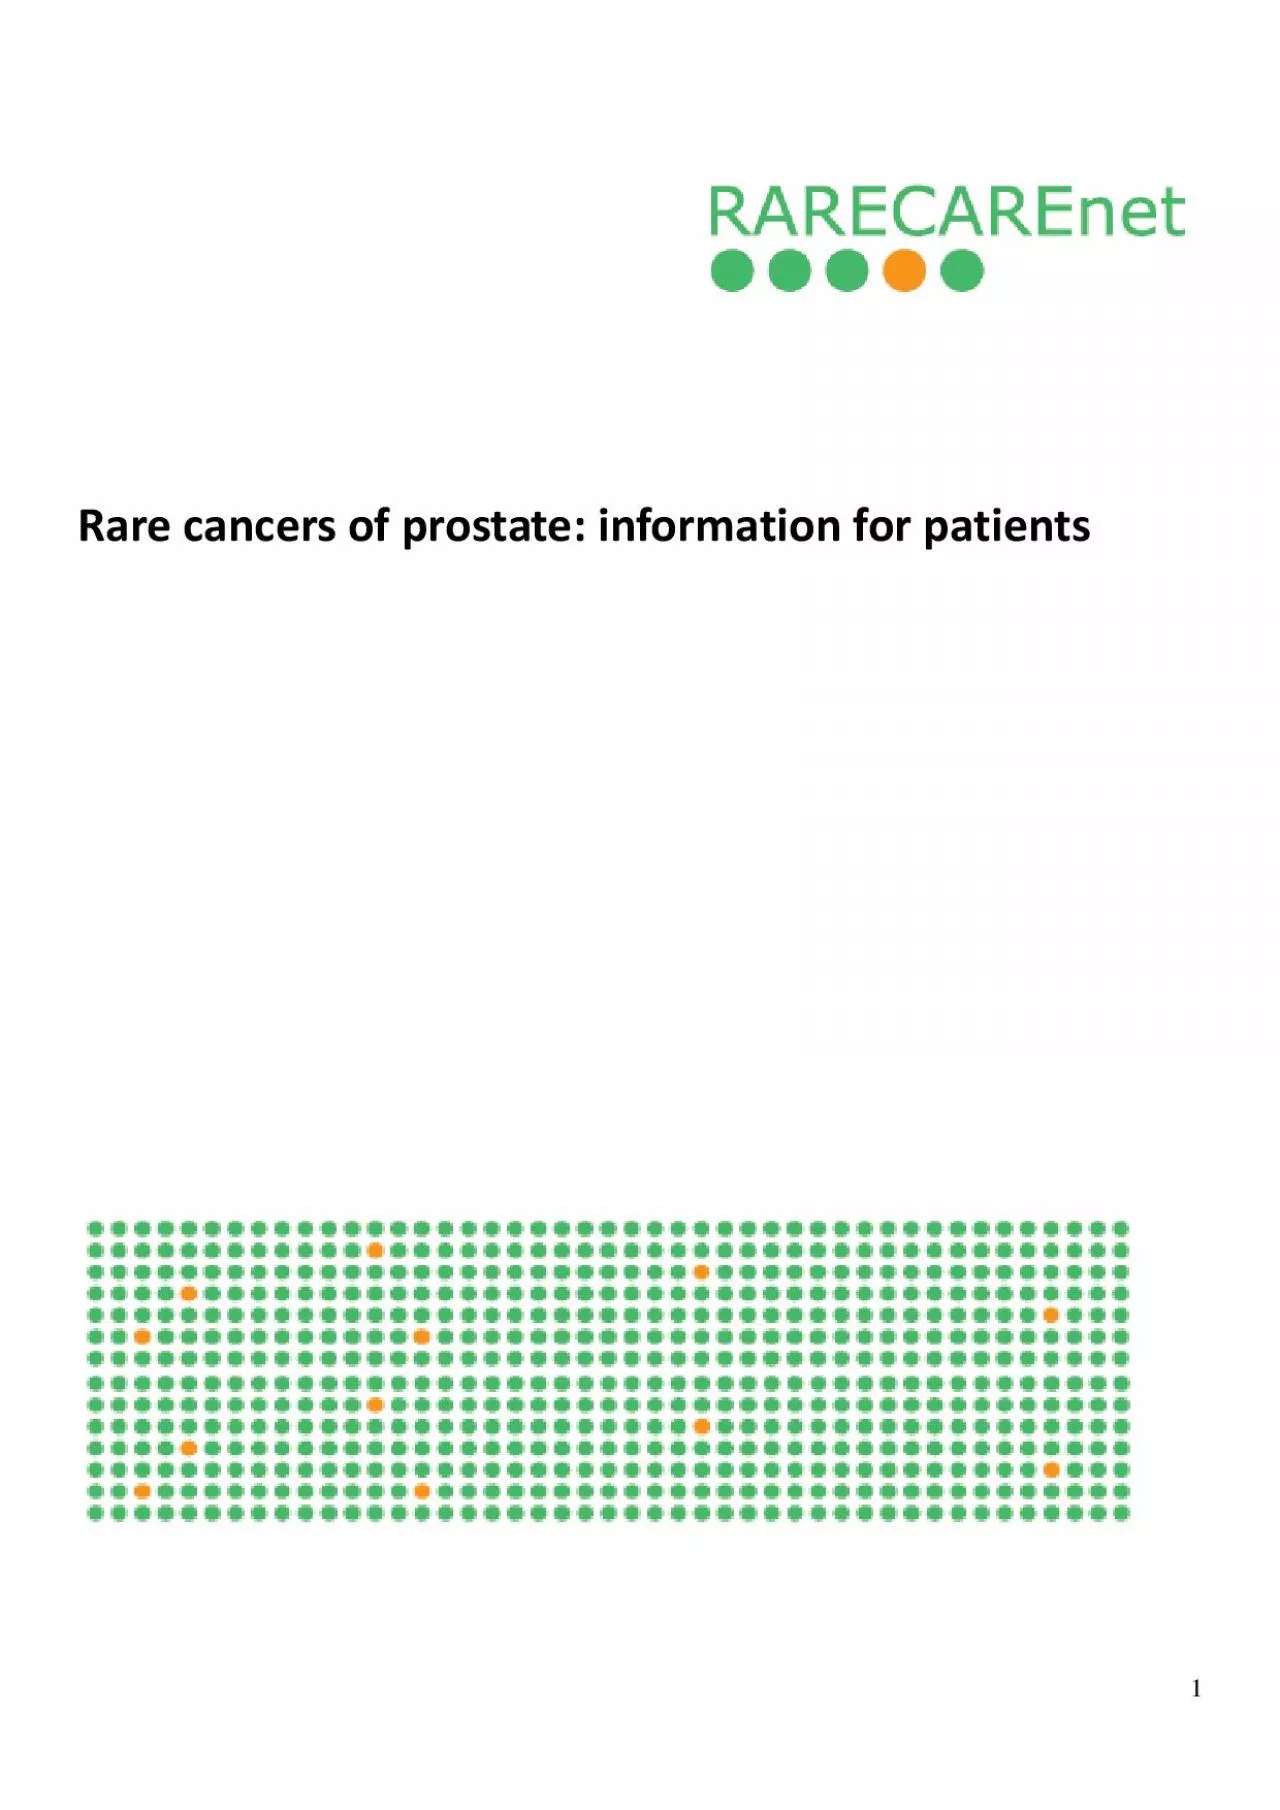 Rare cancers of prostate info